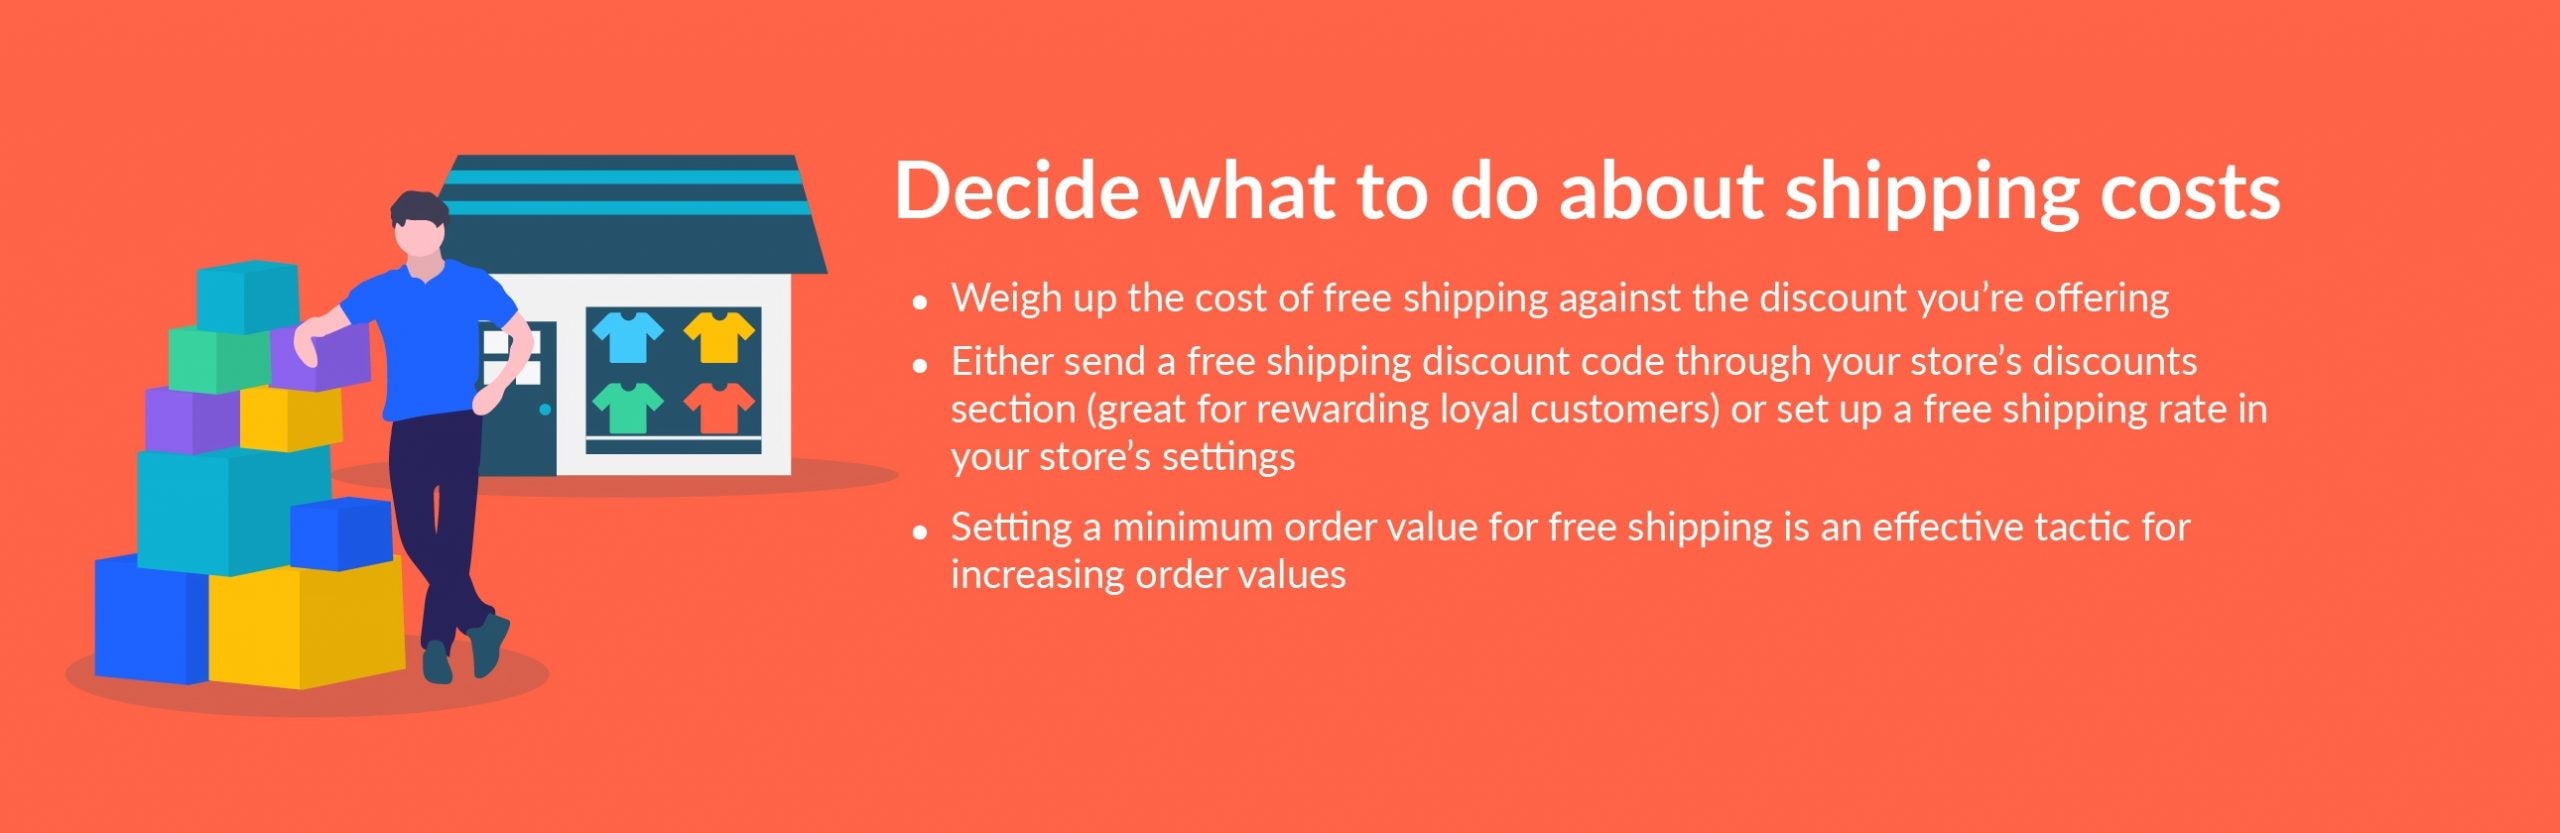 black friday tip decide on shipping costs